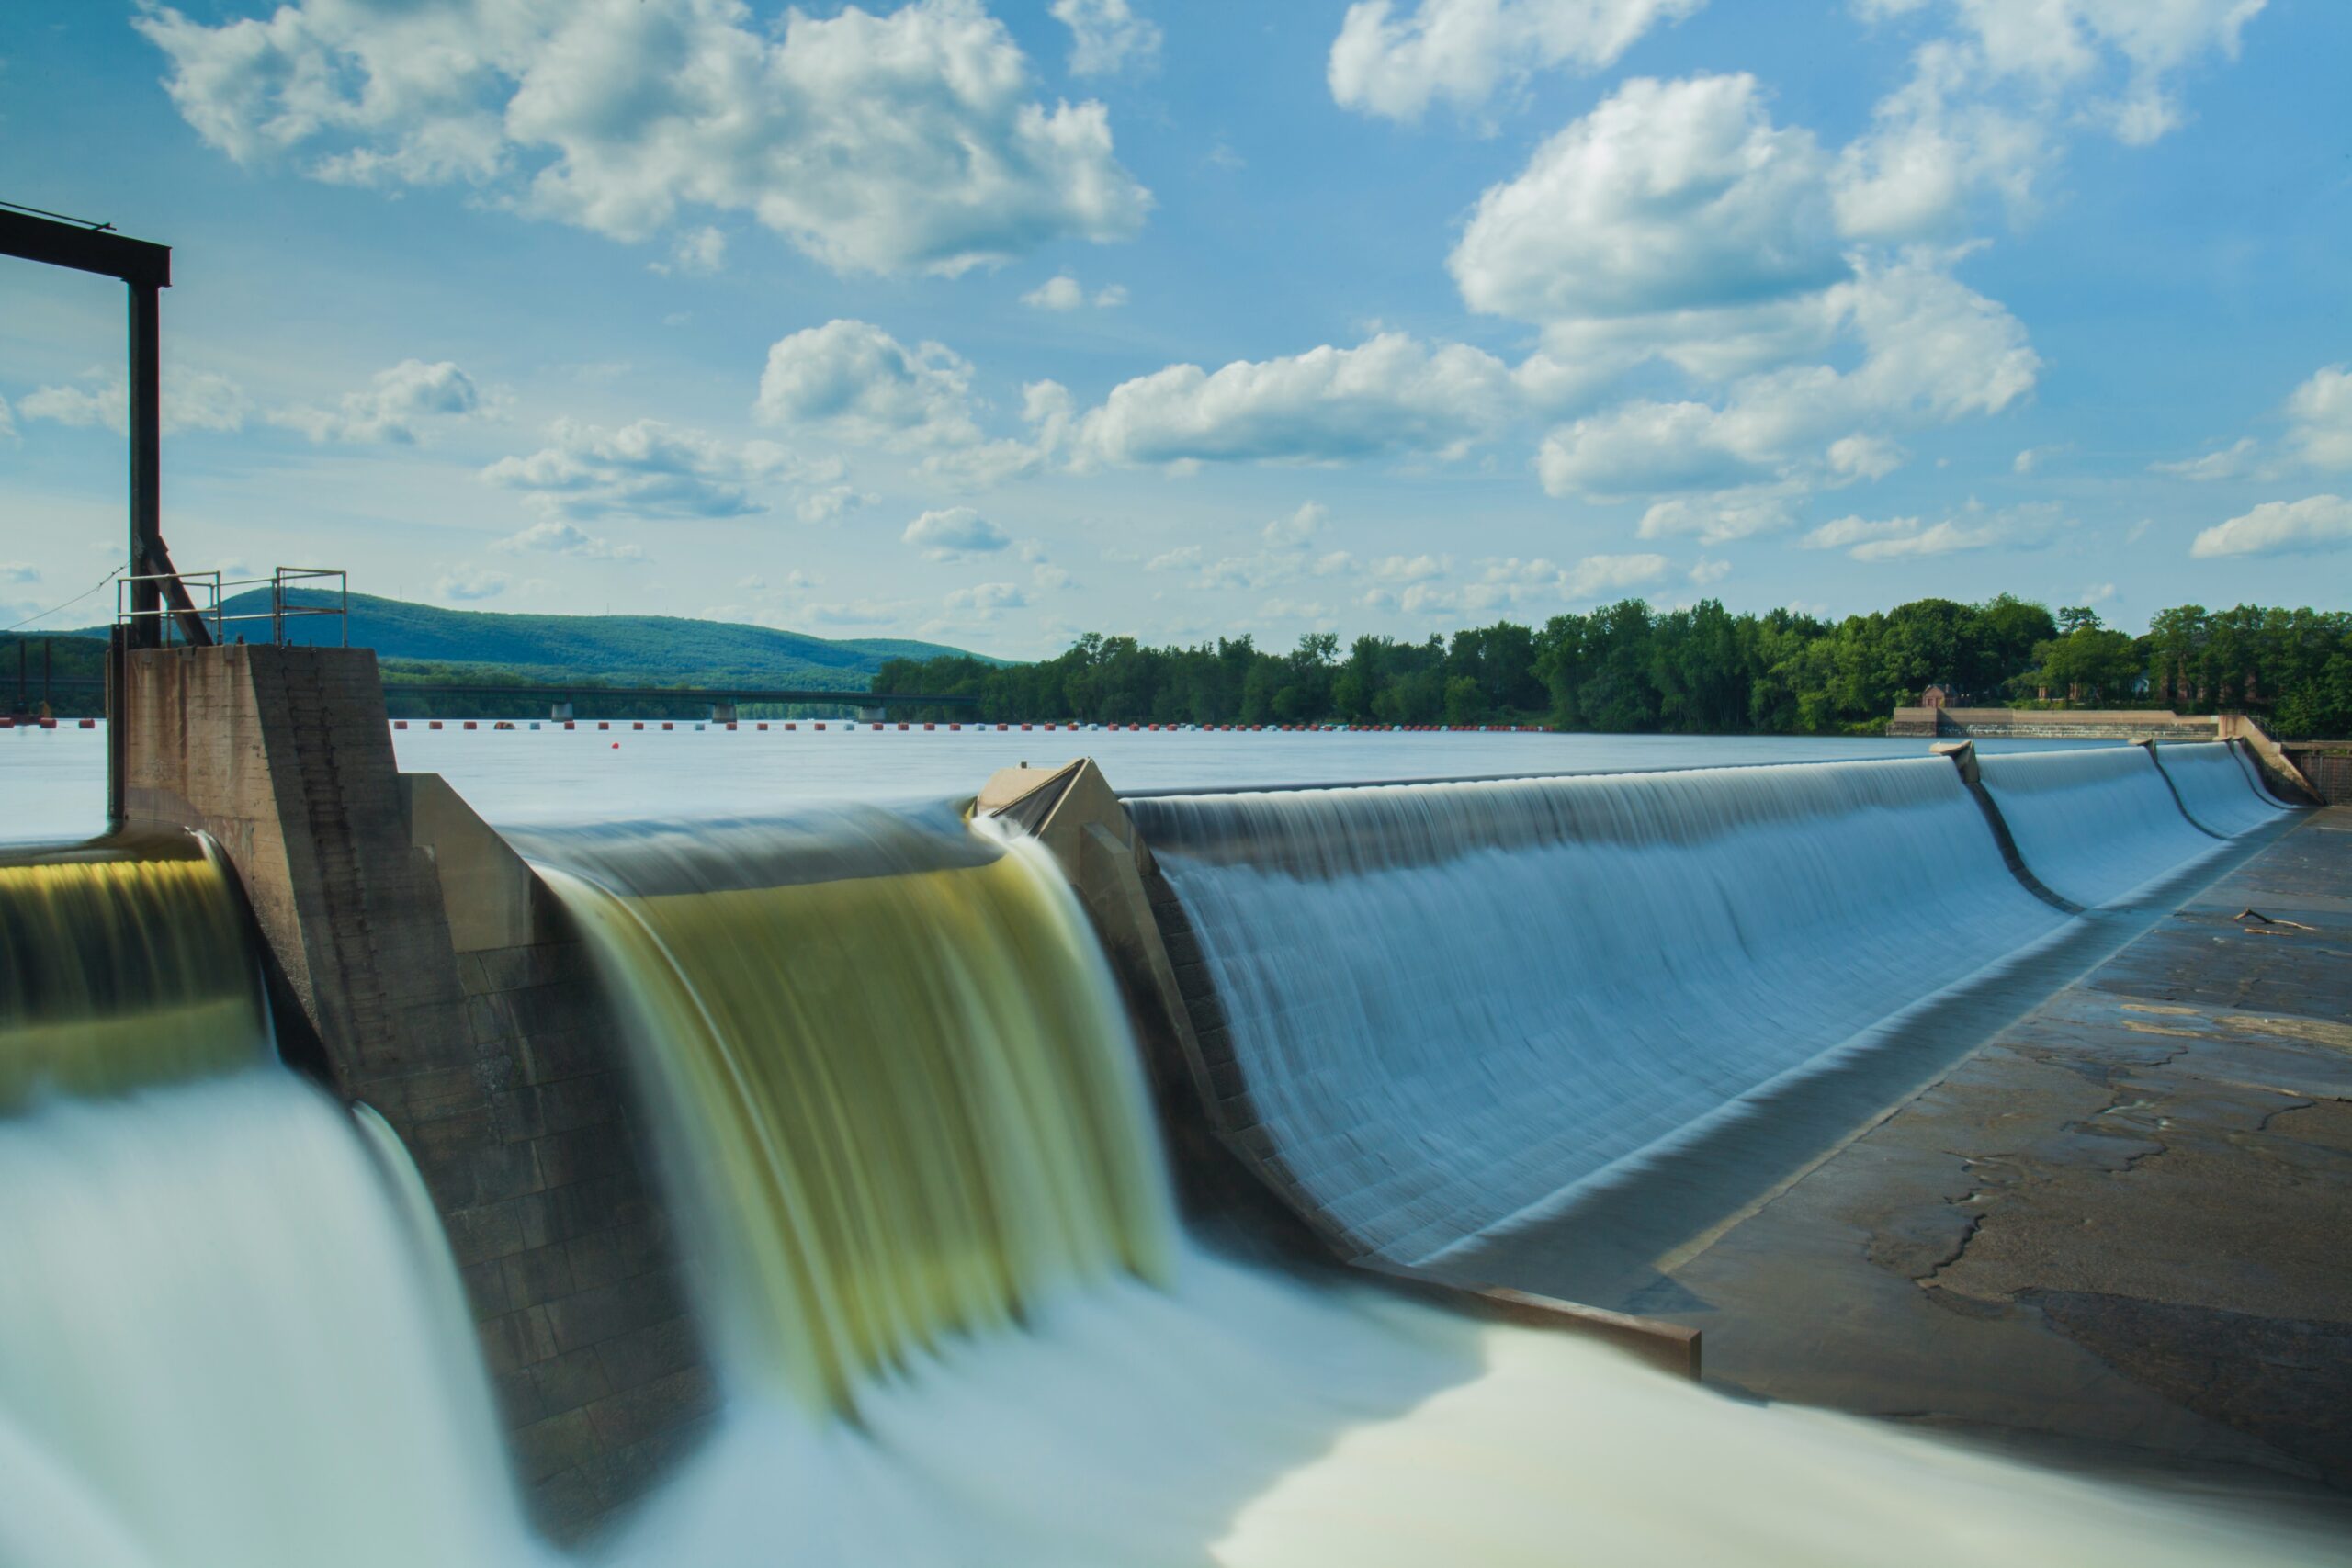 Image of a hydroelectric dam